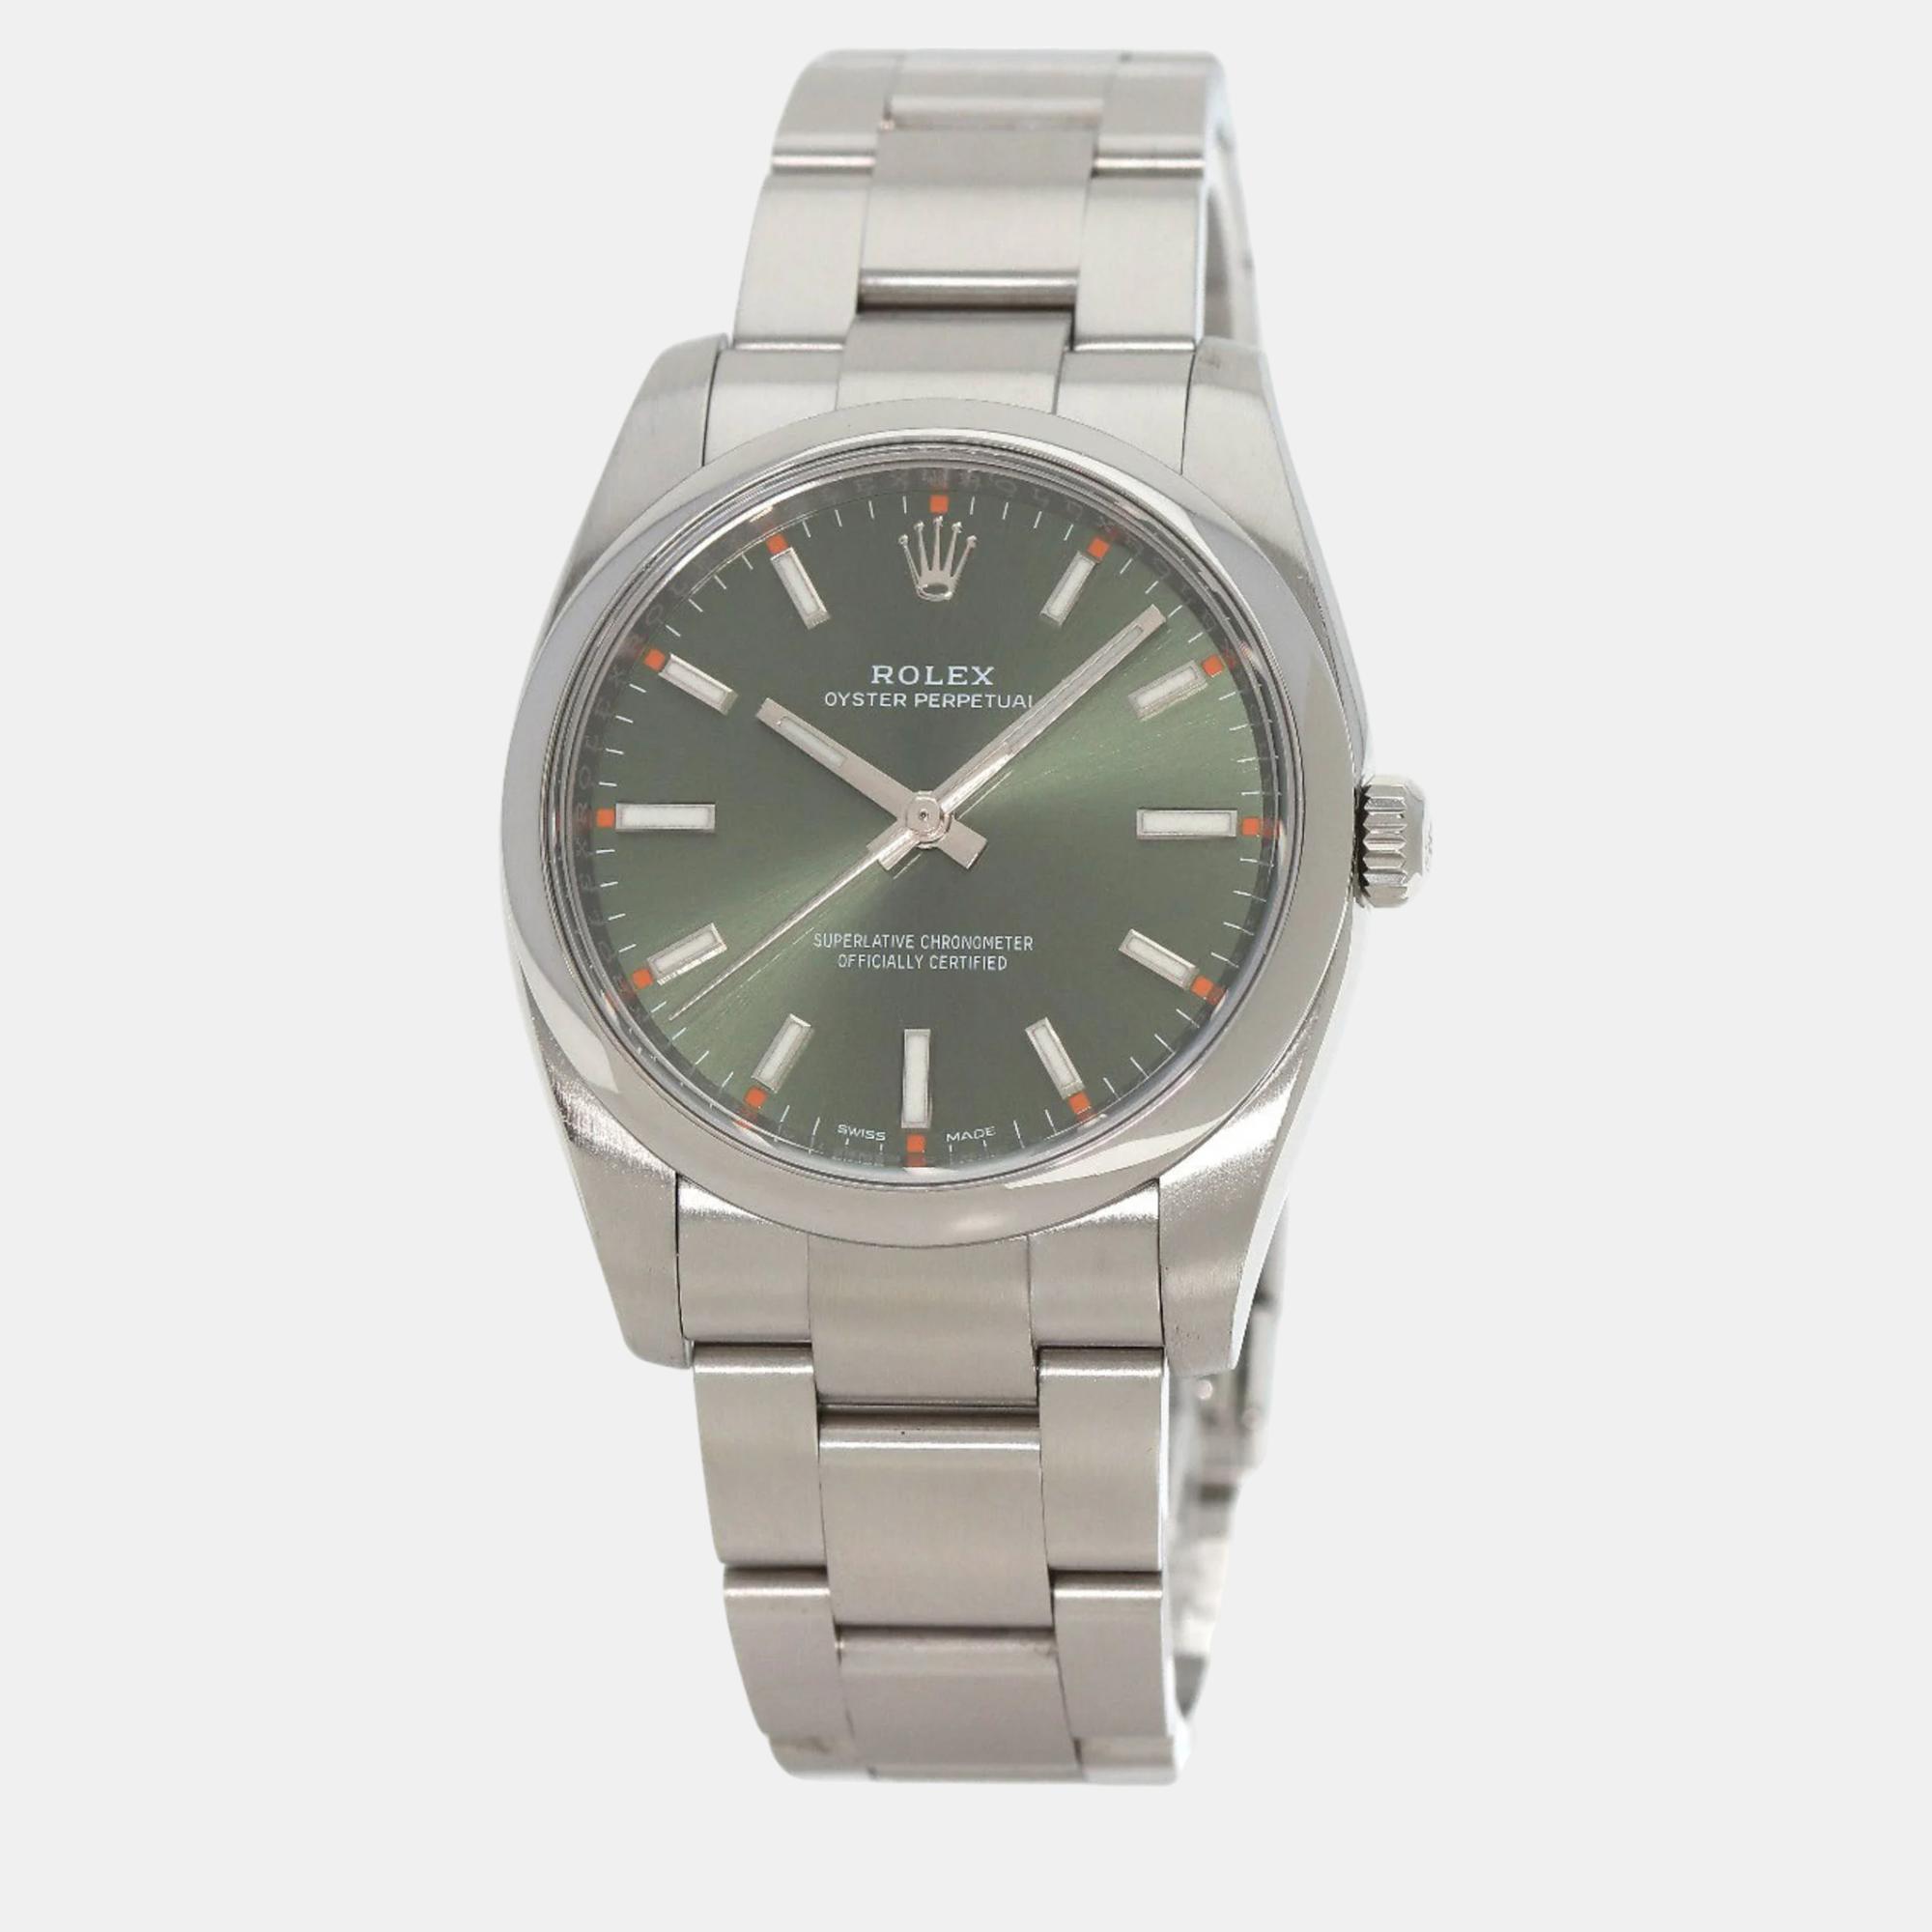 A luxury watch you will love having in your collection is this one from Rolex. Celebrated for its classy style details innovation and luxe factor Rolex delivers some of the most coveted watches in the world. Youll enjoy wearing this one.